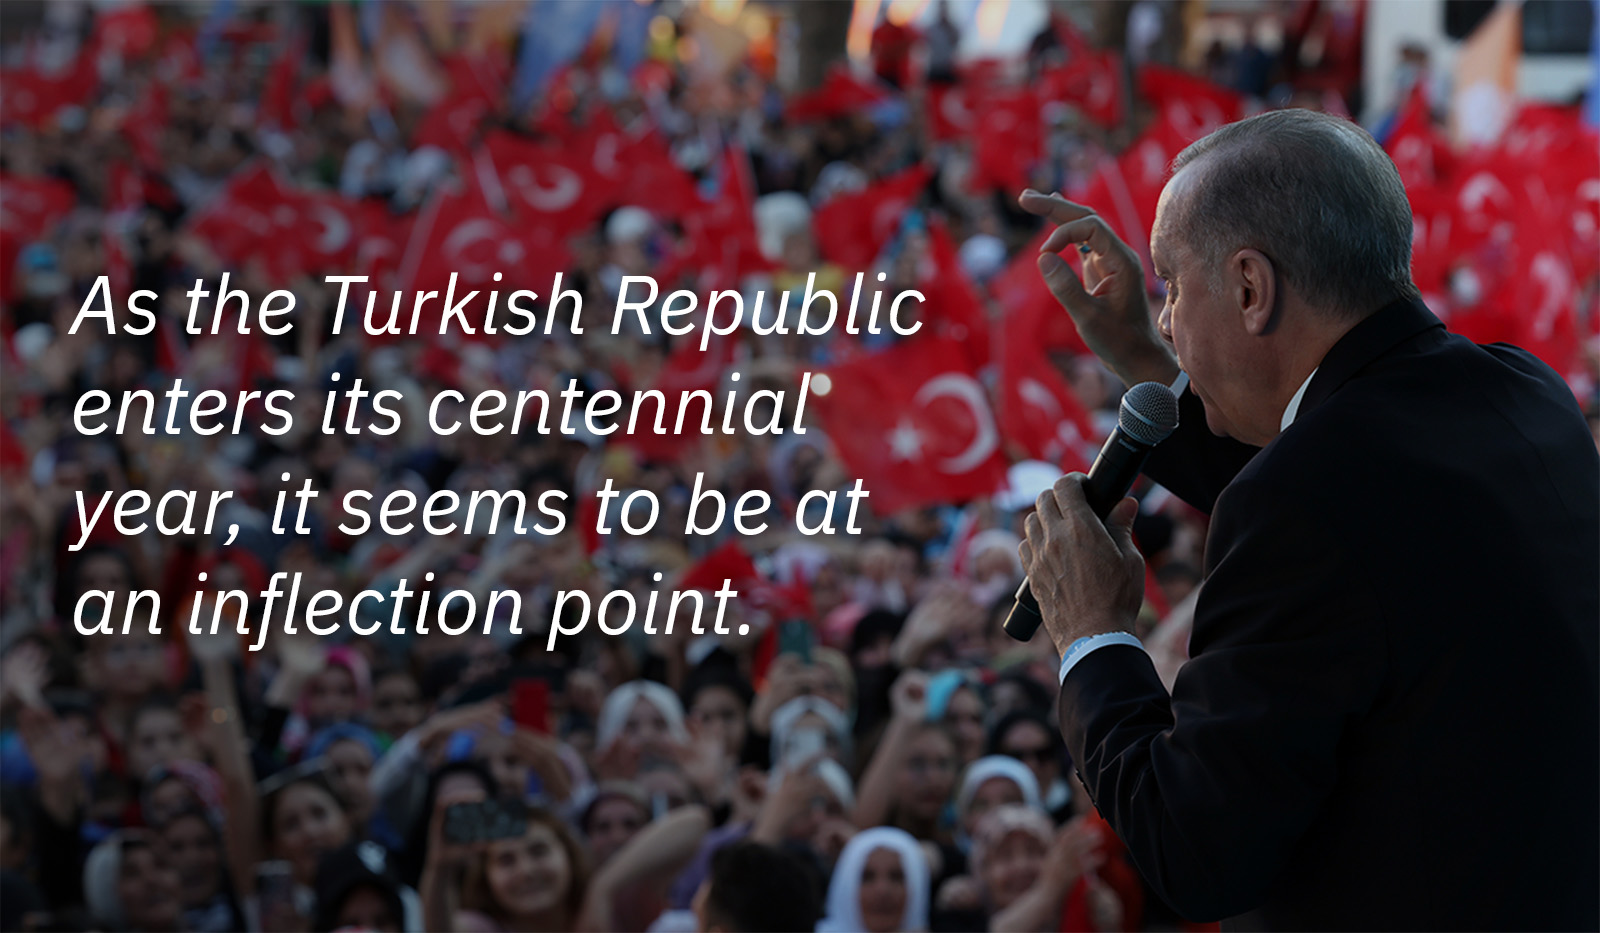 As the Turkish Republic enters its centennial year, it seems to be at an inflection point.